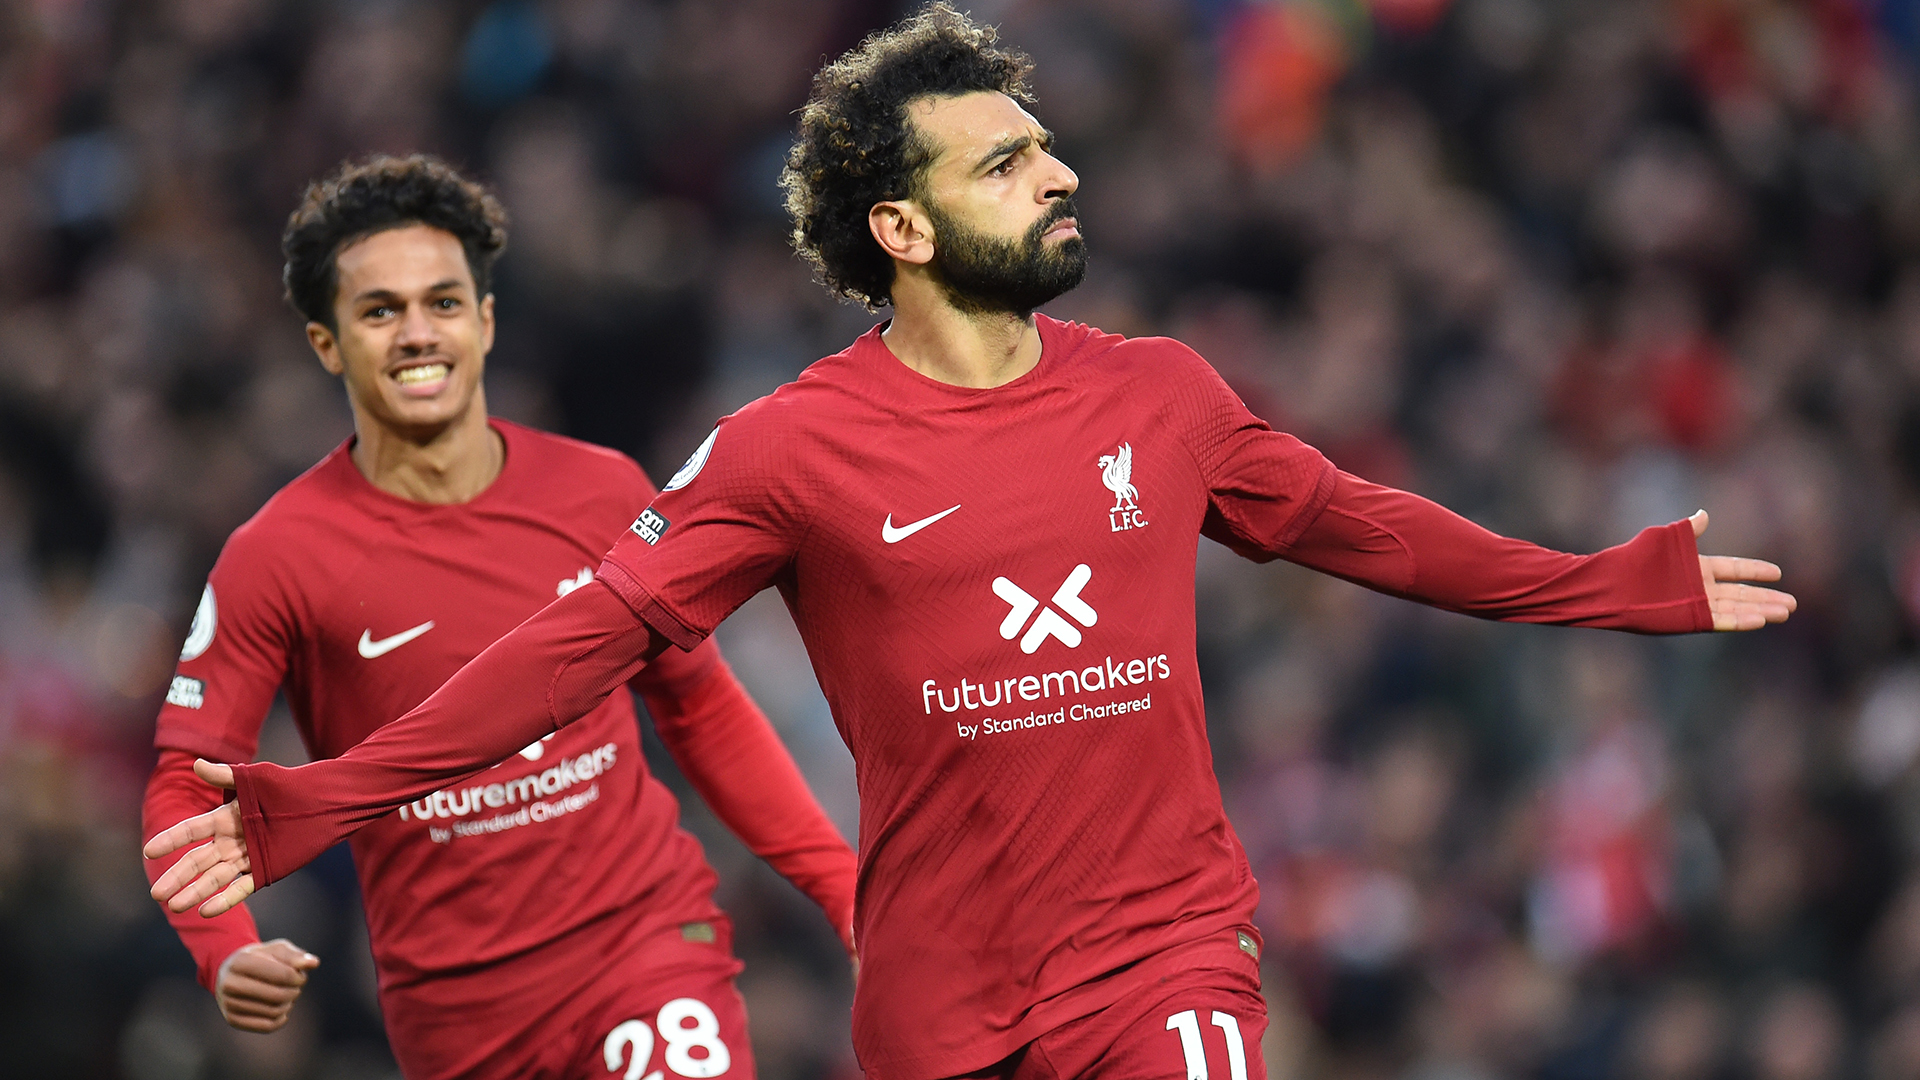 Mohamed Salah of Liverpool celebrates after scoring the first goal during the Premier League match between Liverpool FC and Manchester City at Anfield on October 16, 2022 in Liverpool, England.